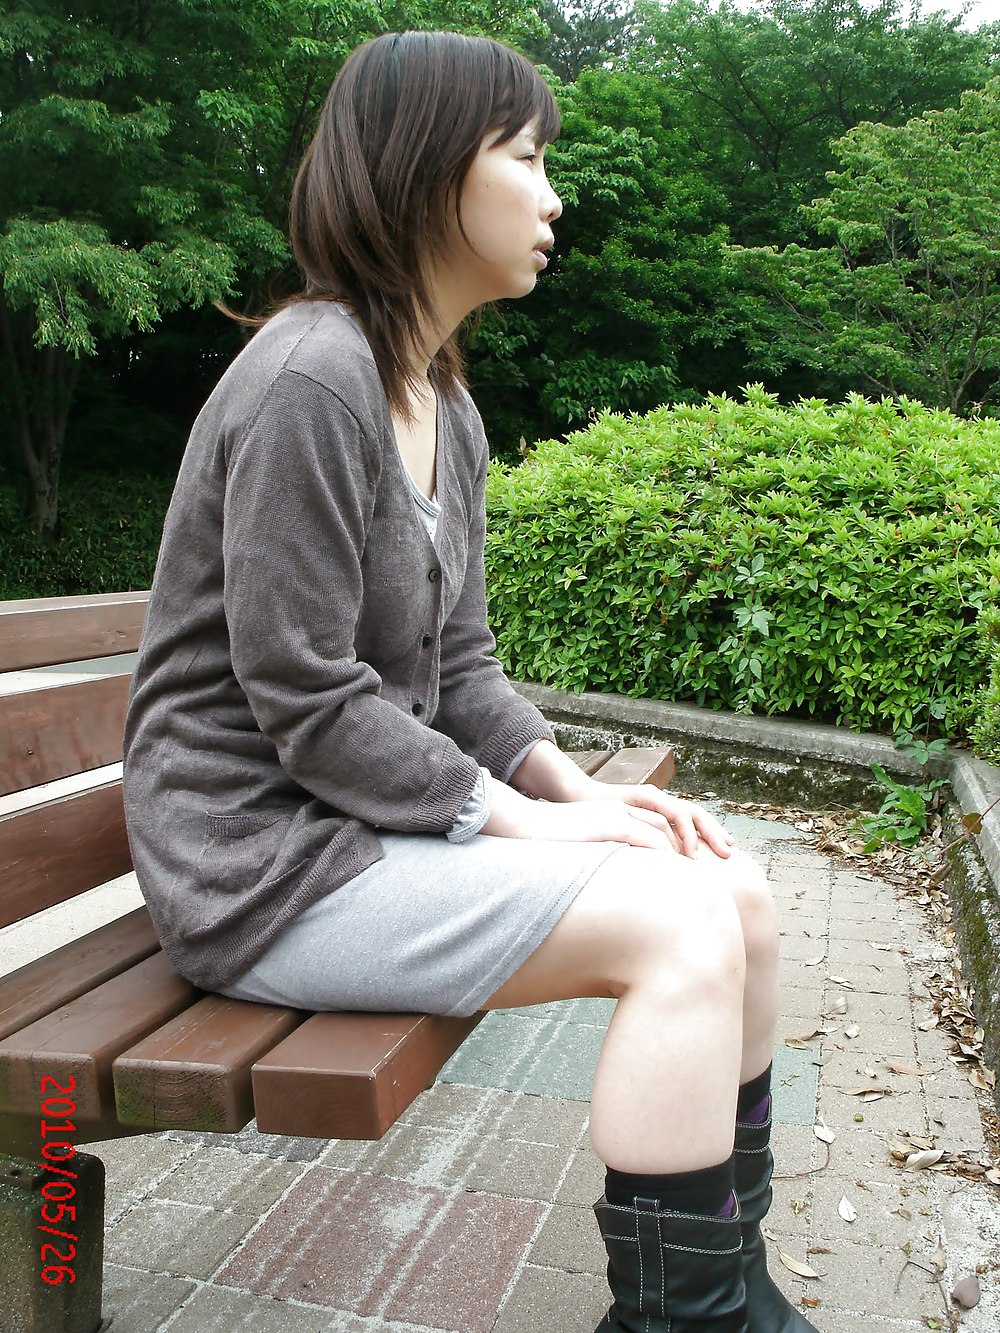 Asian Teen Pictures: Japanese Exhibitionist Amateur.